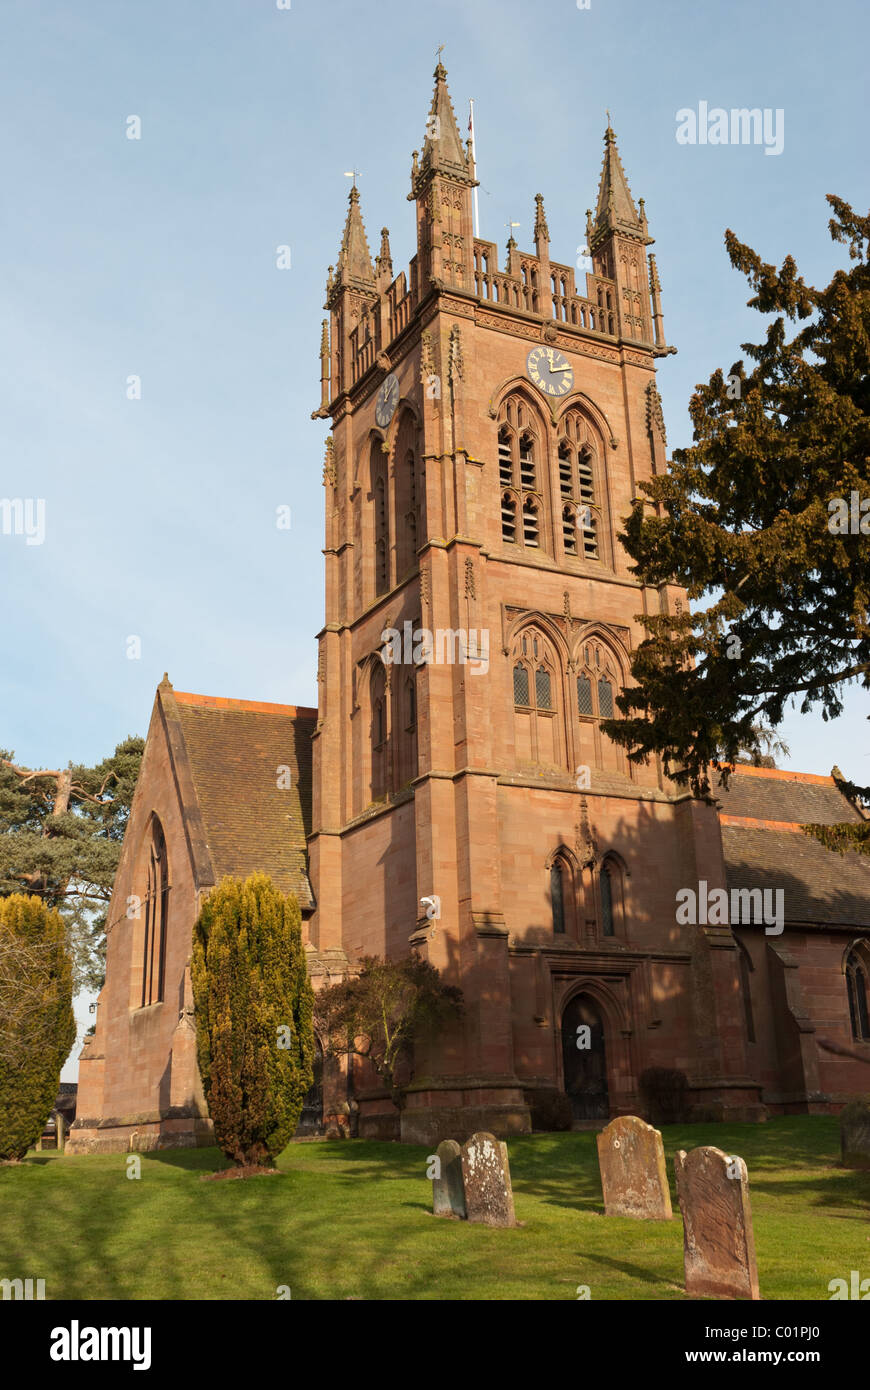 St. Mary's Church, Enville,Staffordshire,uk Stock Photo